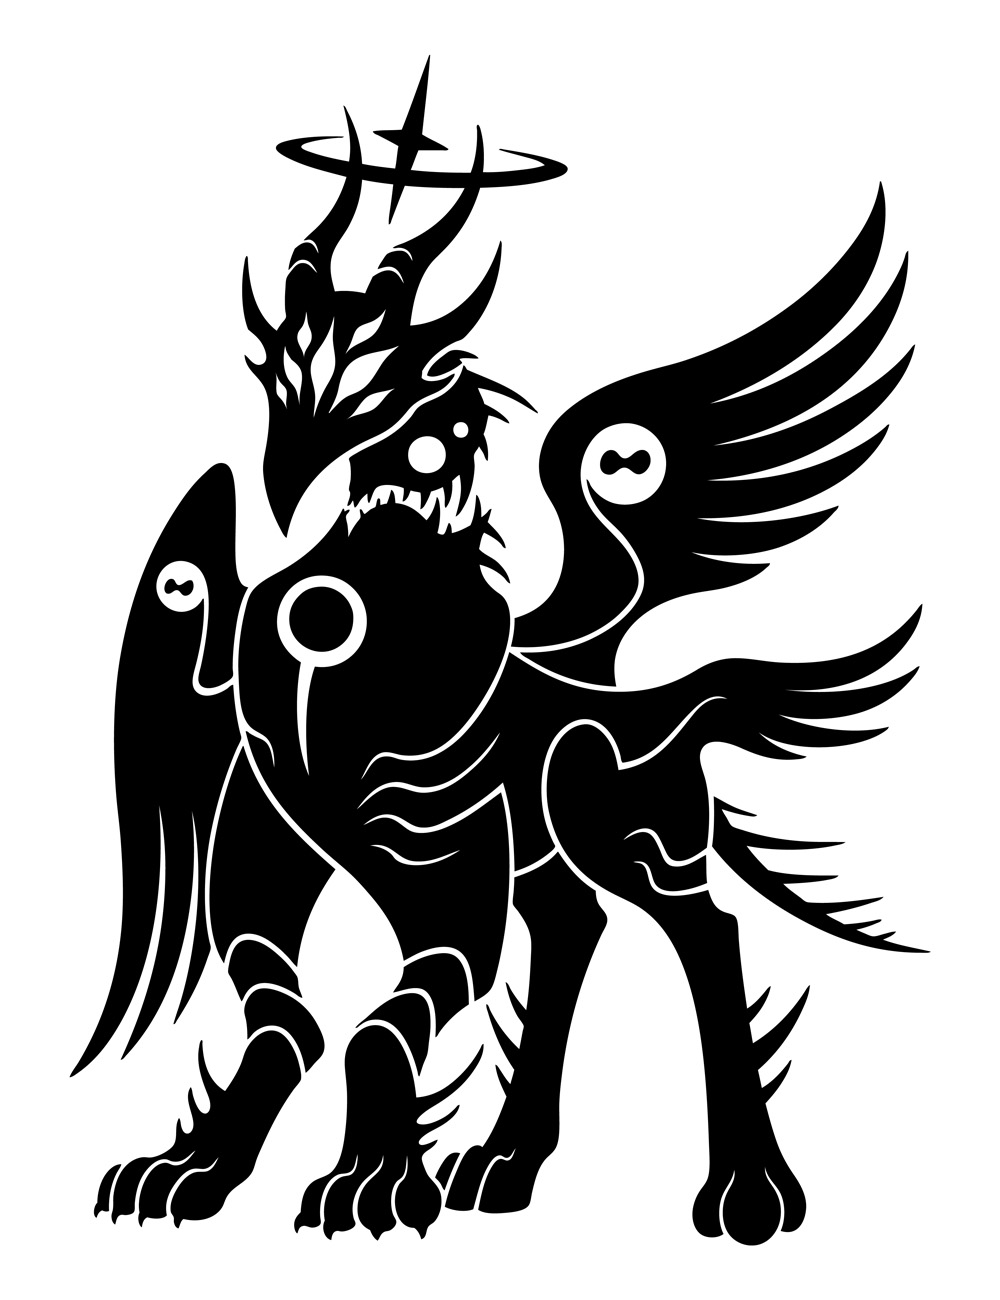 Archons (SCP Foundation)